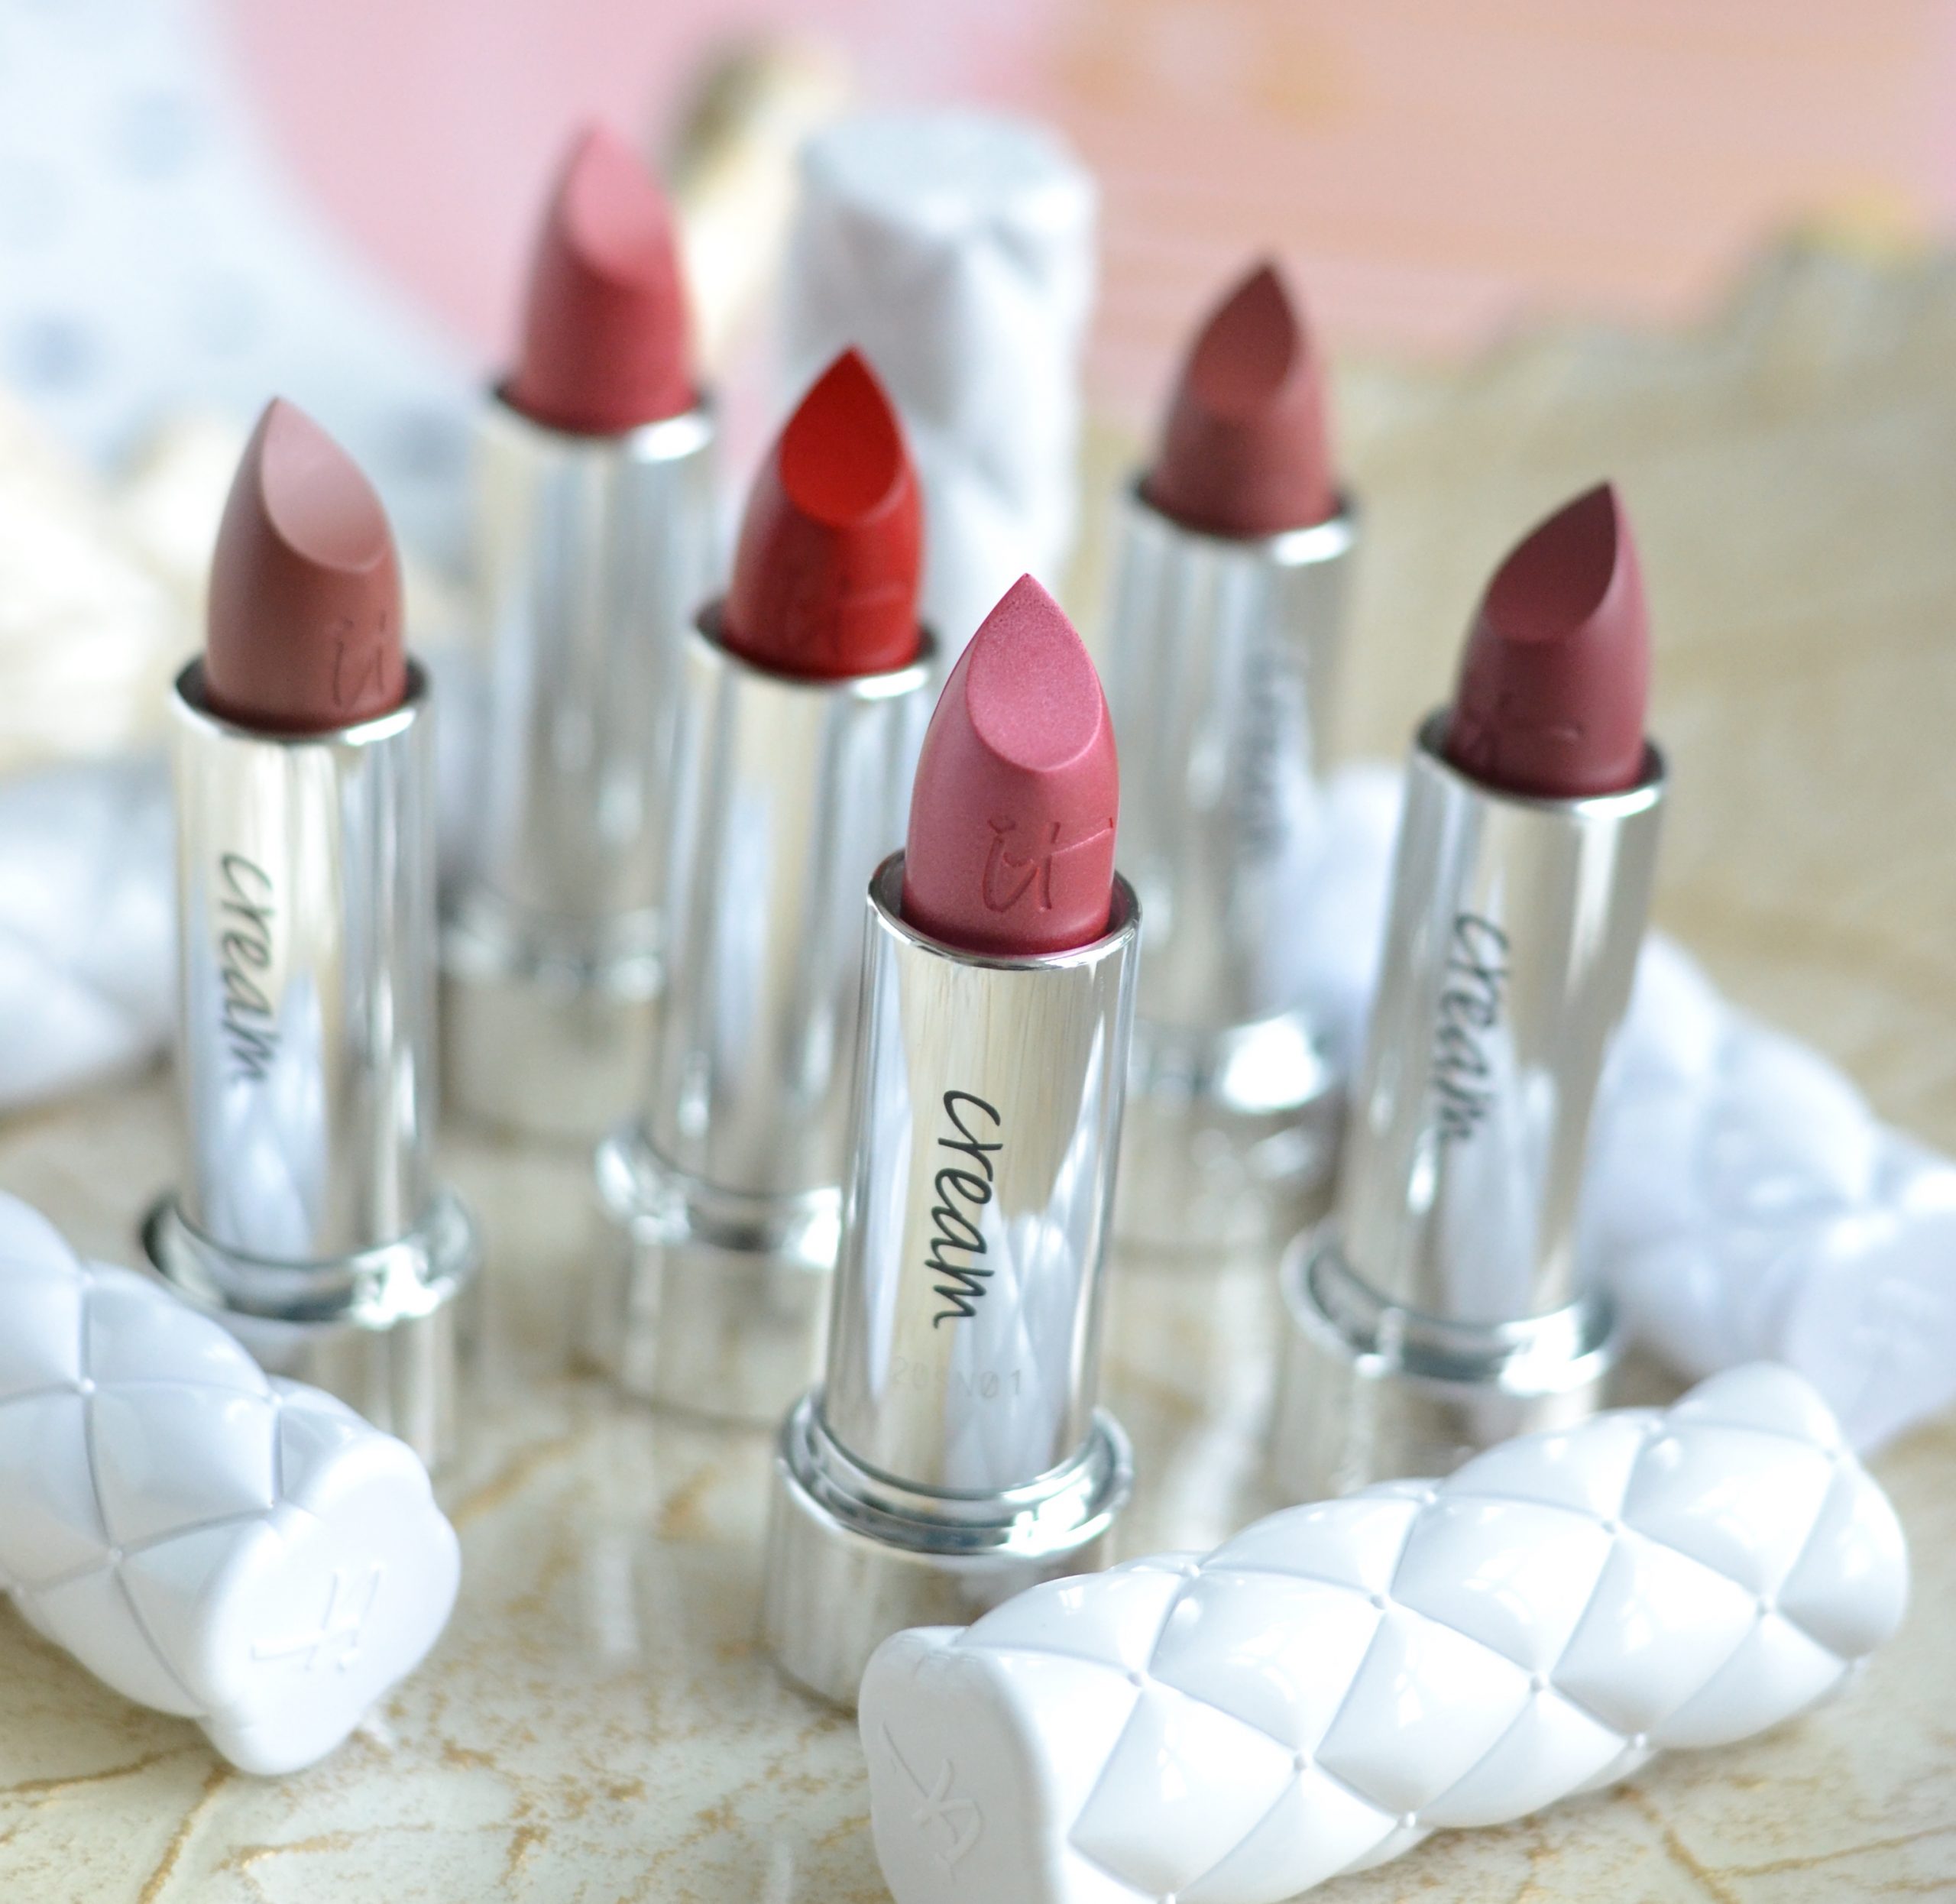 IT Cosmetics Pillow Lips Lipsticks review and swatches